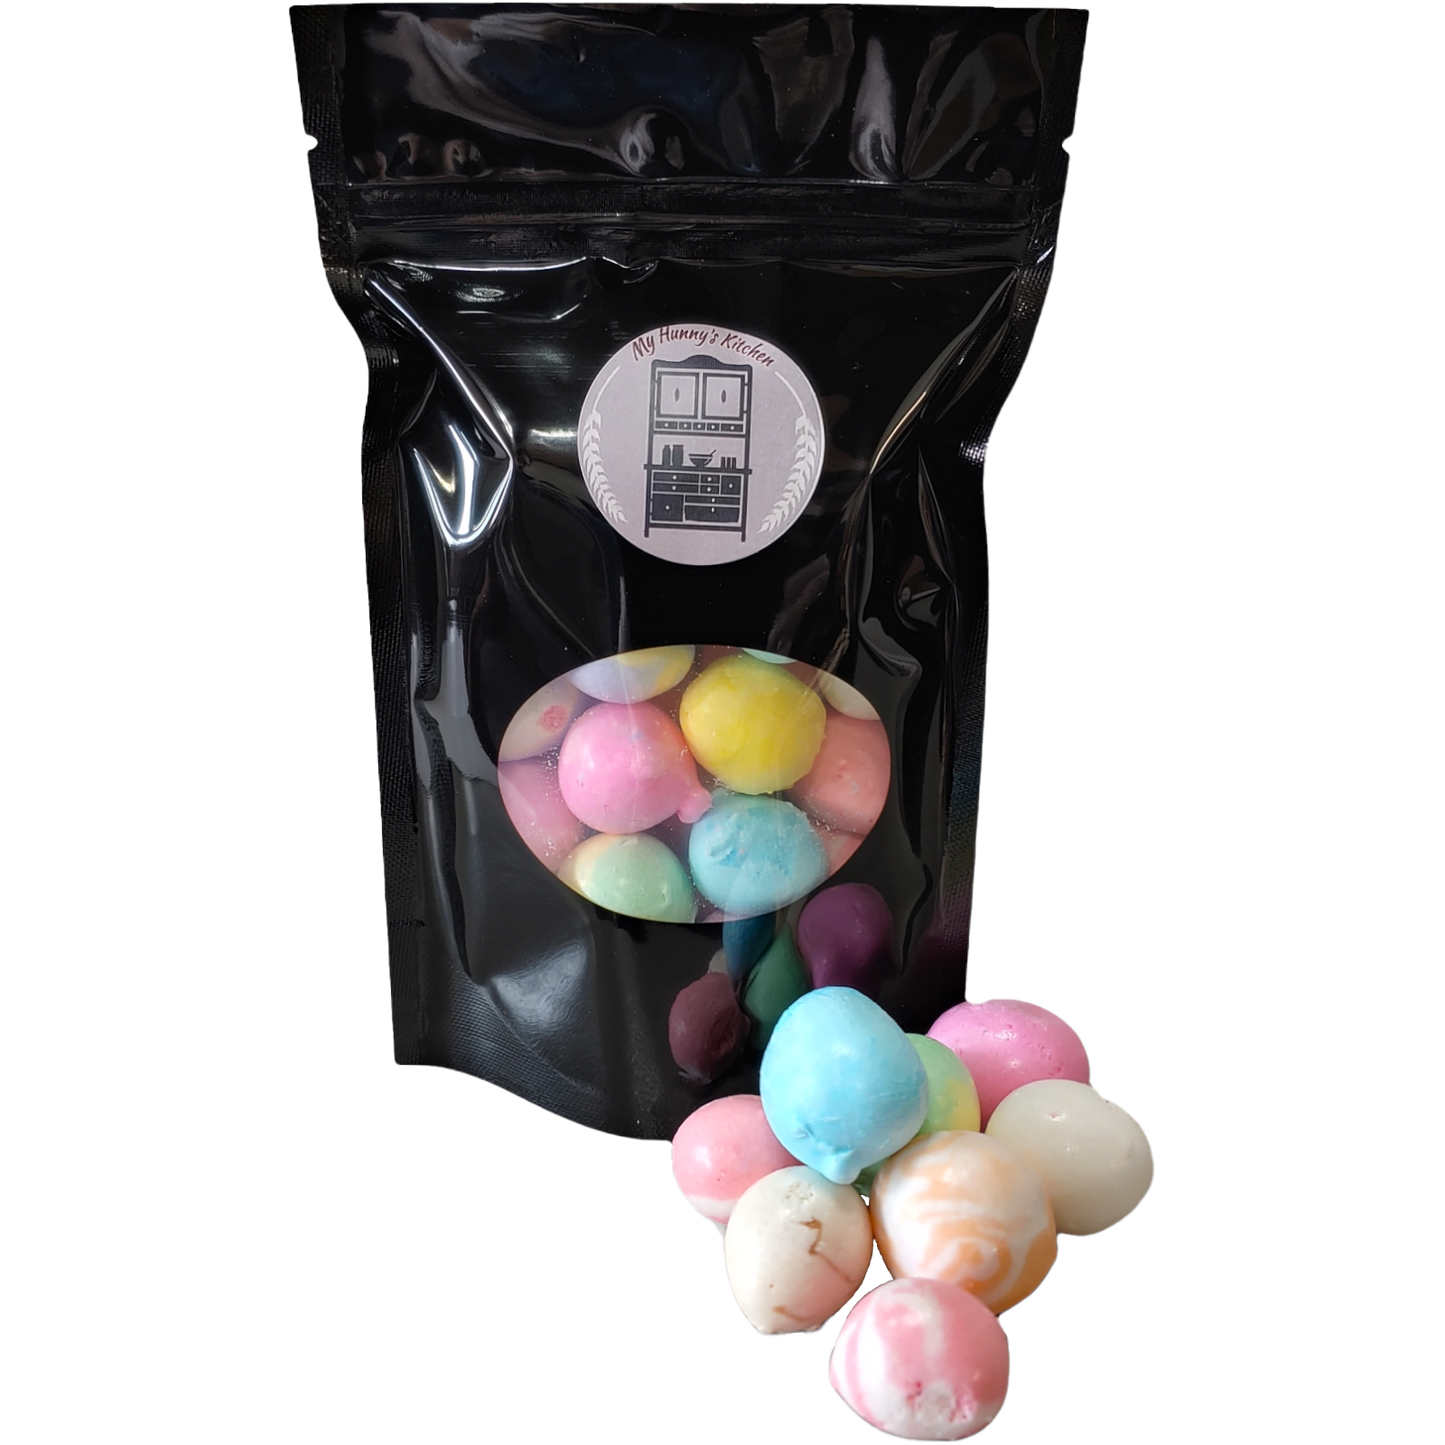 Saltwater Taffy Freeze Dried Candy packaging front view